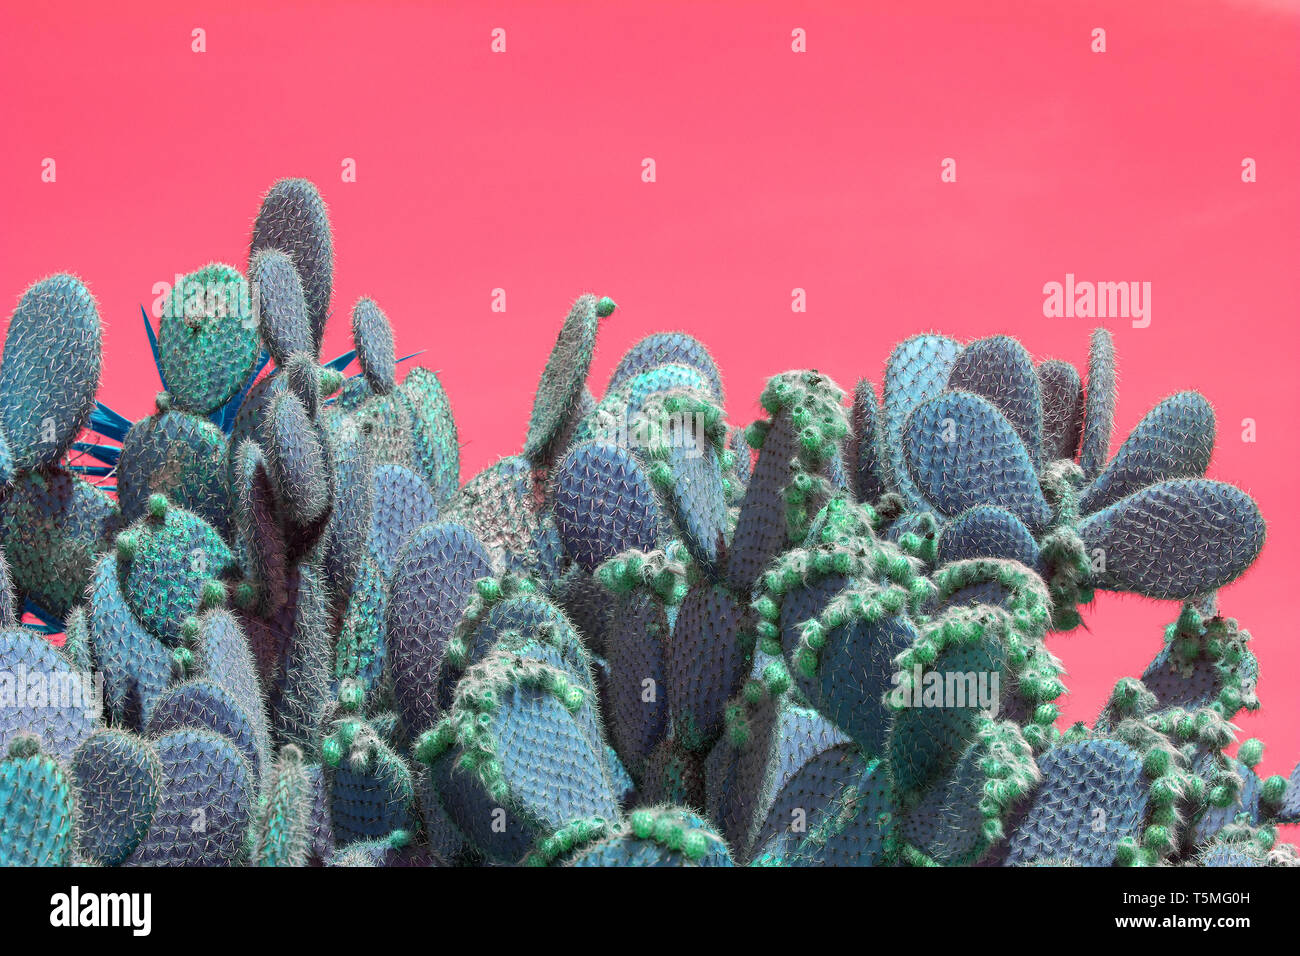 Surrealistic abstract cactus and succulent plants in arid landscape with pink red sky Stock Photo